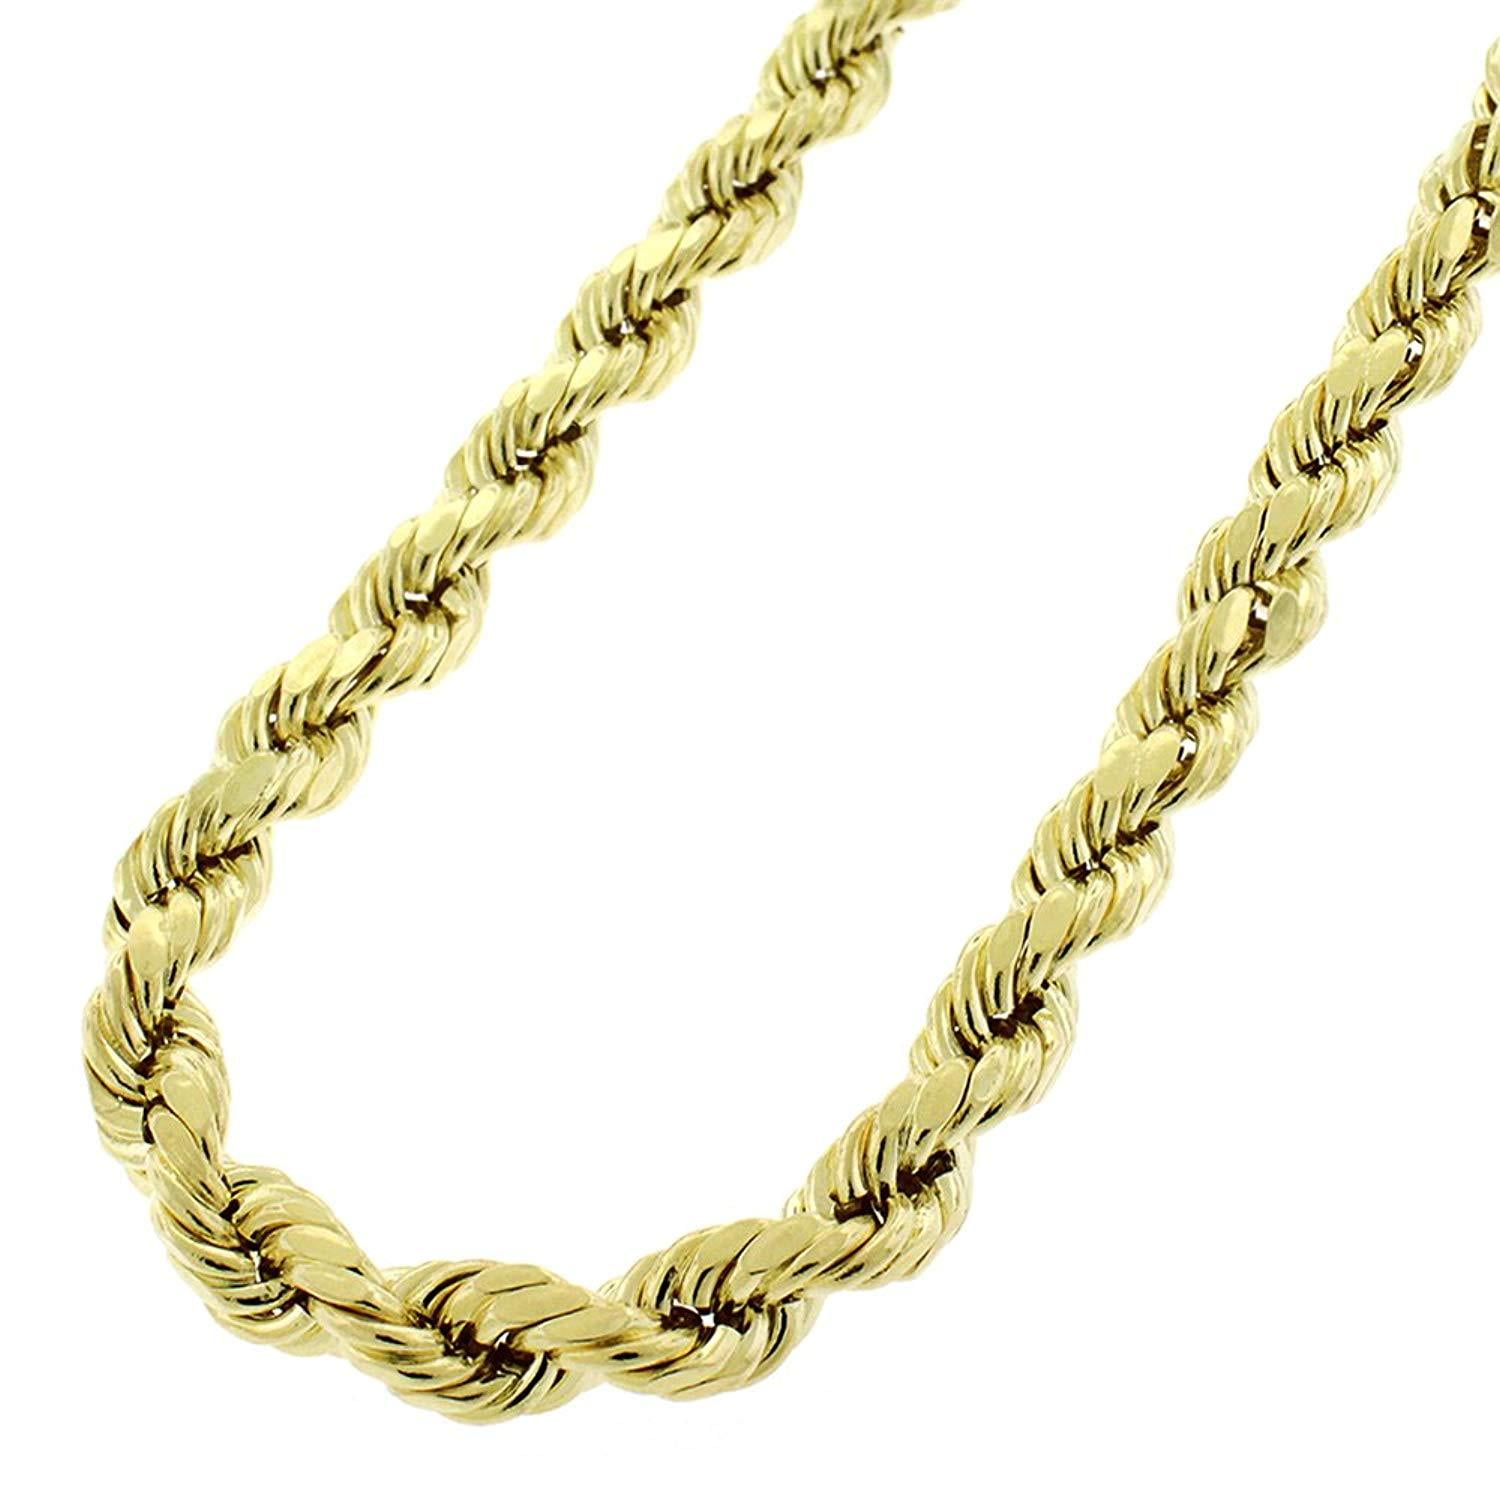 14K Yellow Gold 6MM Solid Rope Diamond-Cut Braided Twist Link Necklace ...